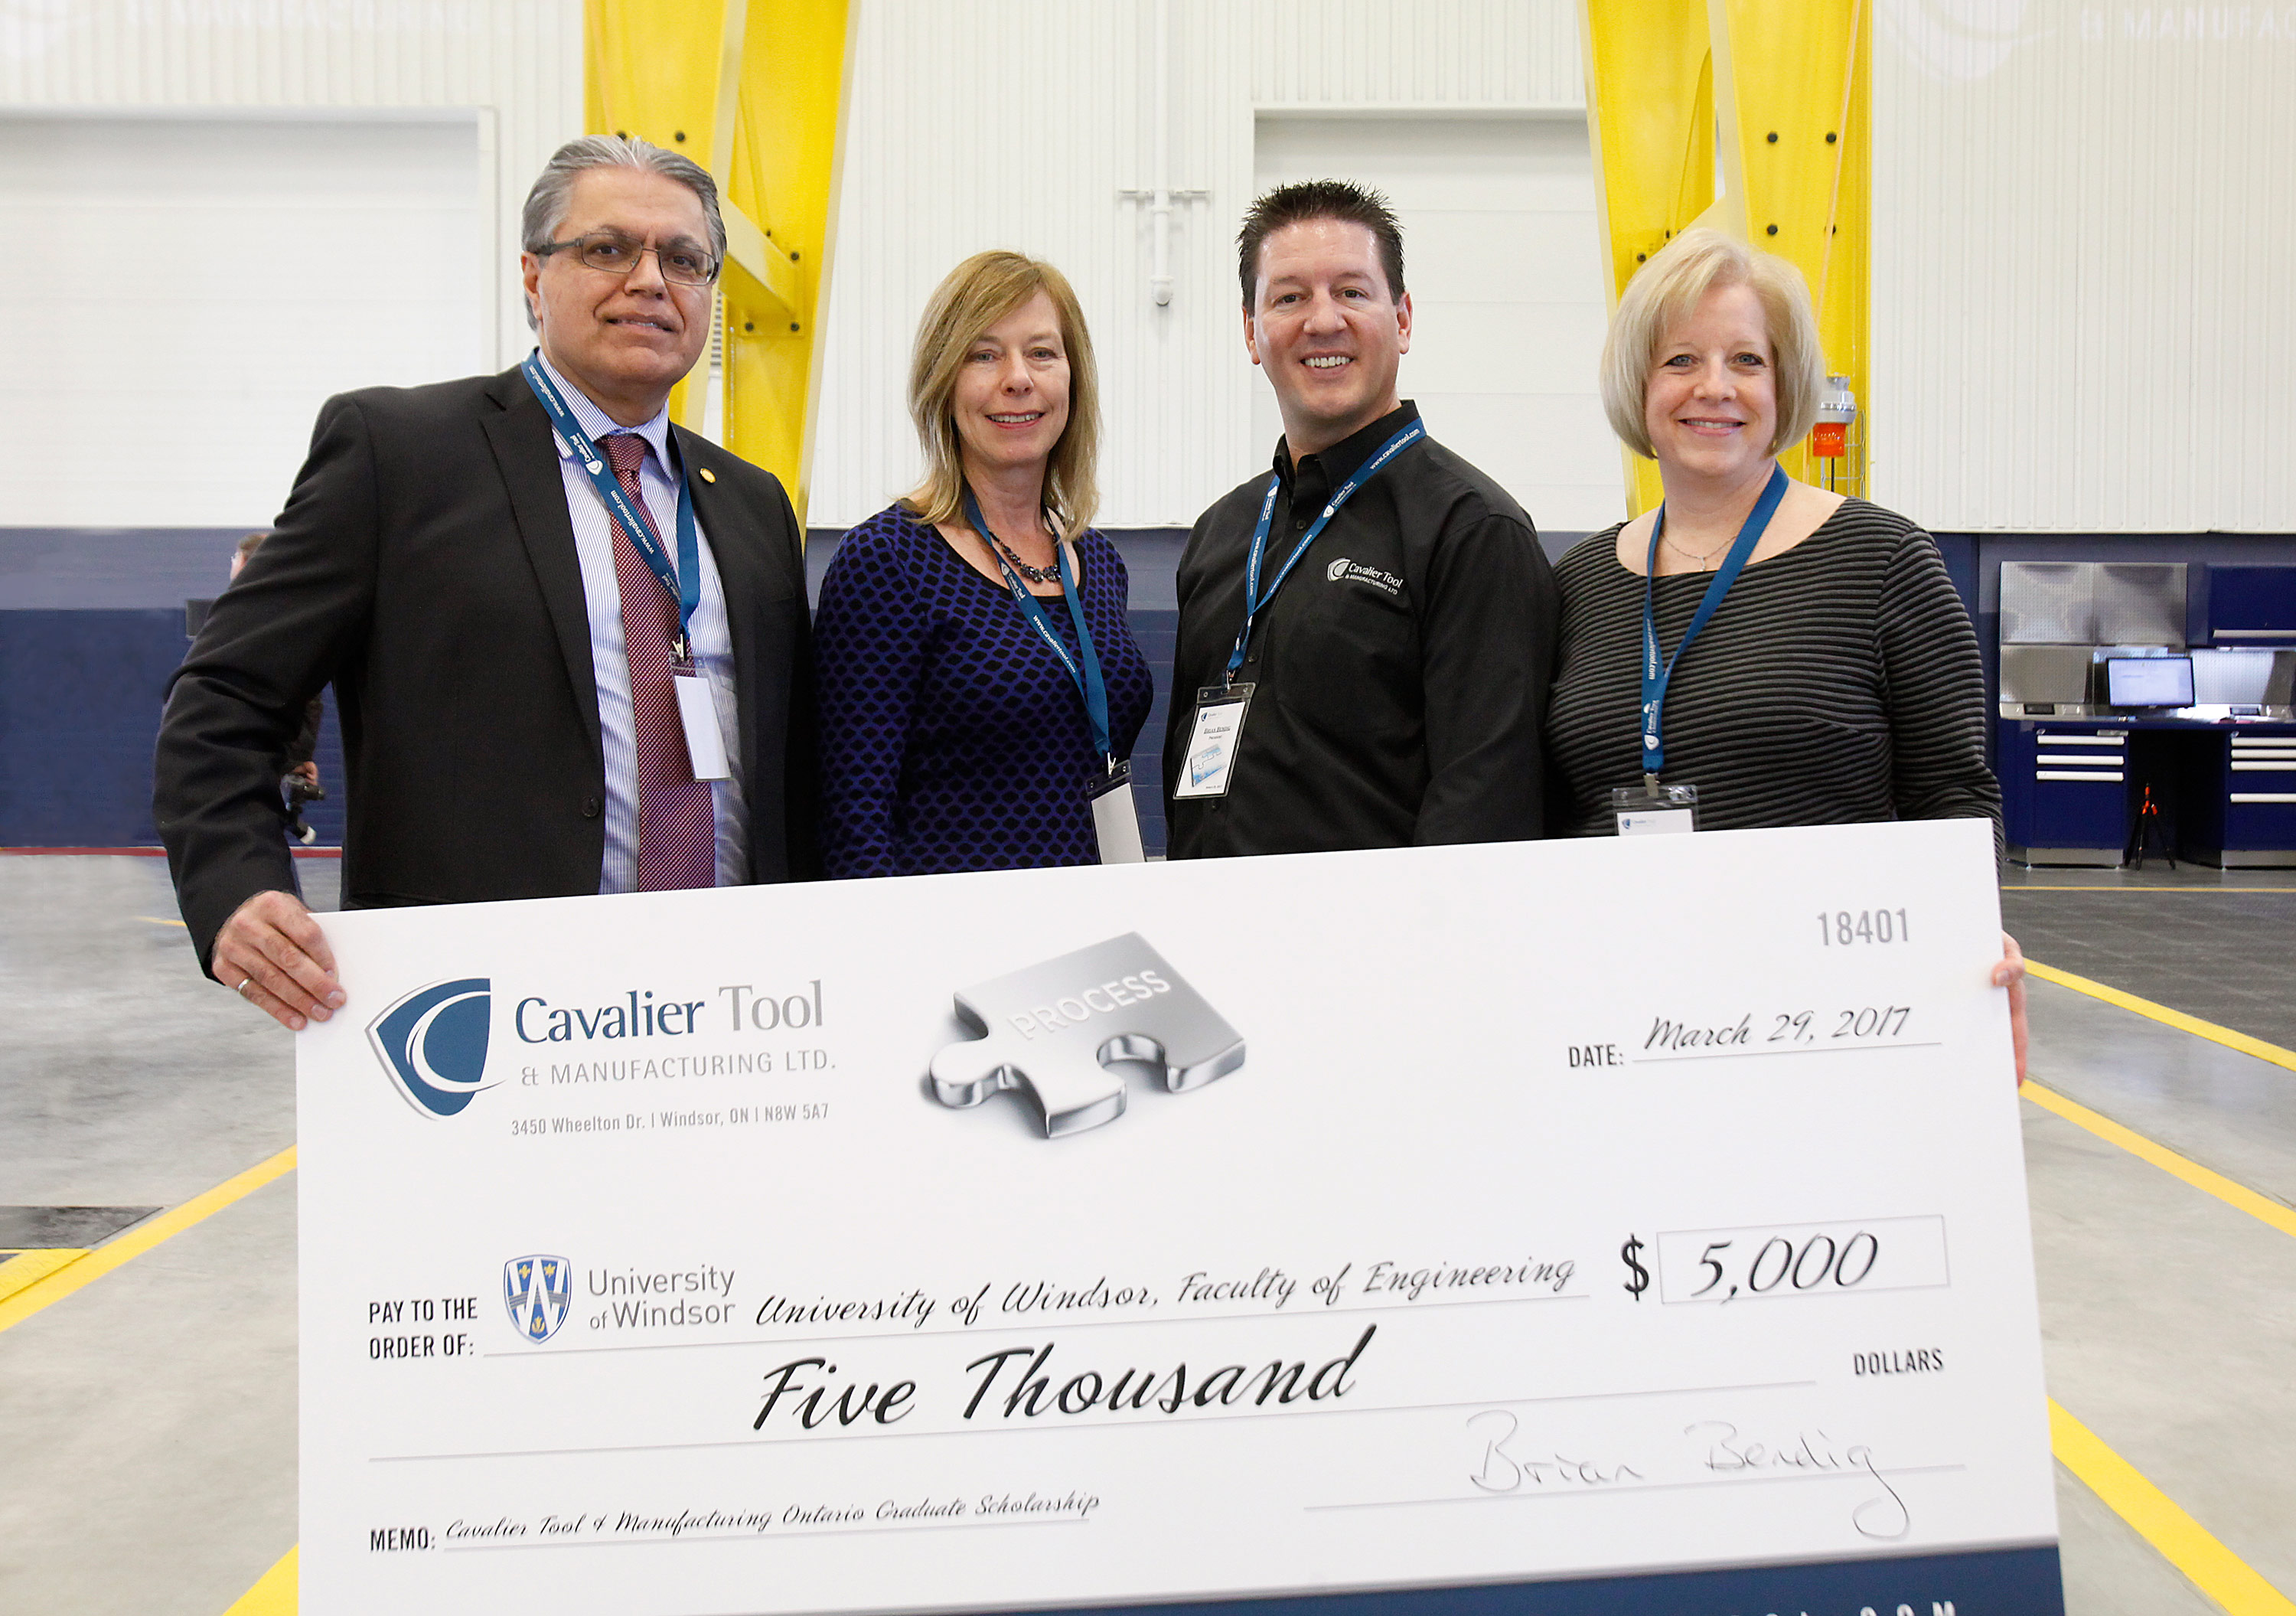 Faculty of engineering accepting 5000 donation from Cavalier Tool